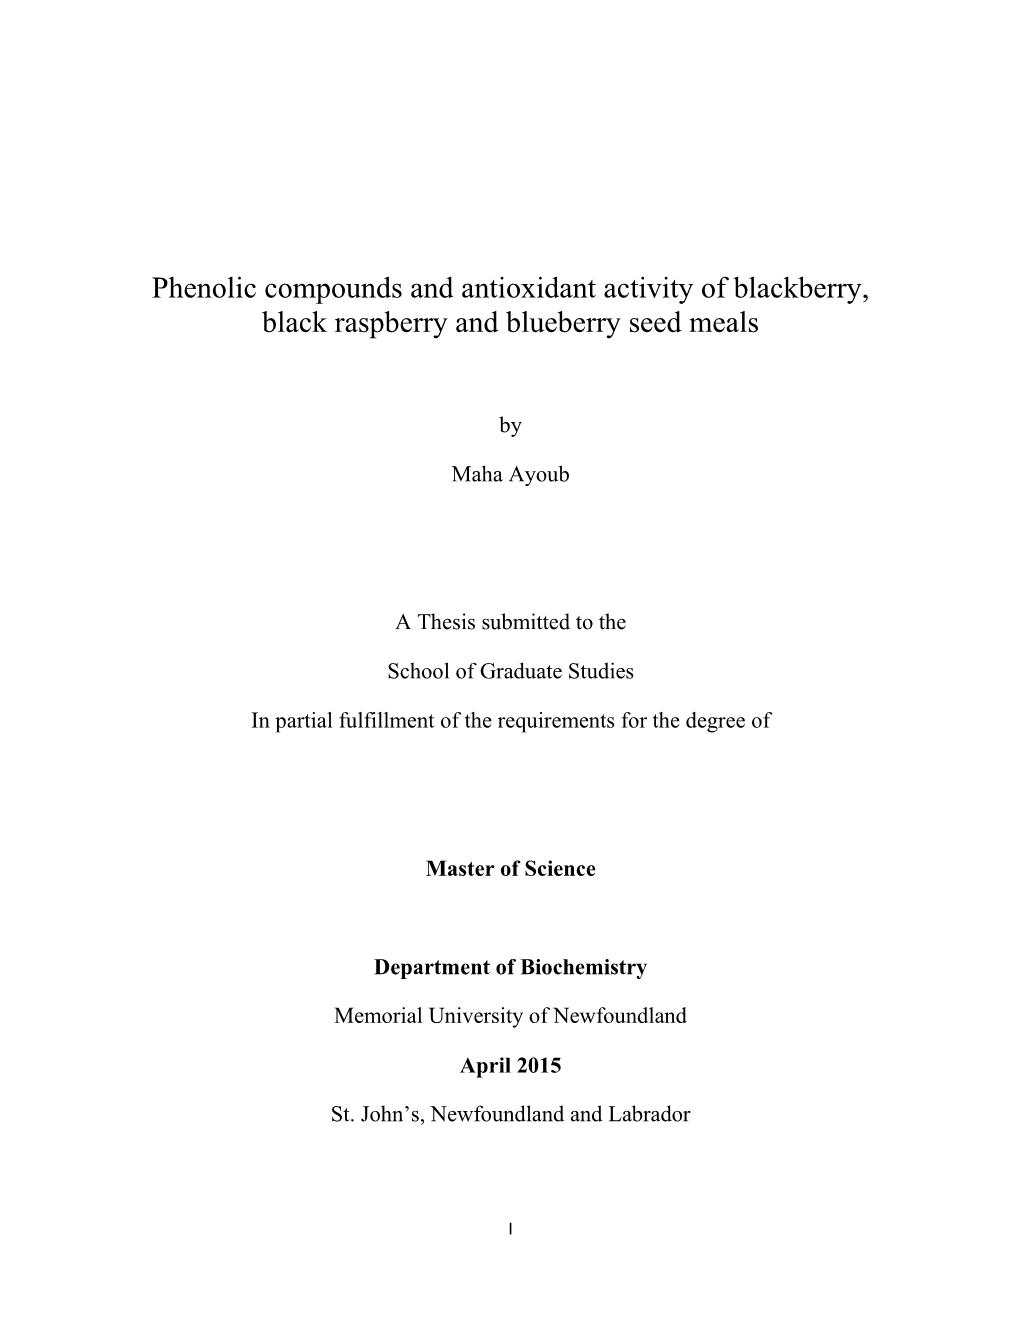 Phenolic Compounds and Antioxidant Activity of Blackberry, Black Raspberry and Blueberry Seed Meals